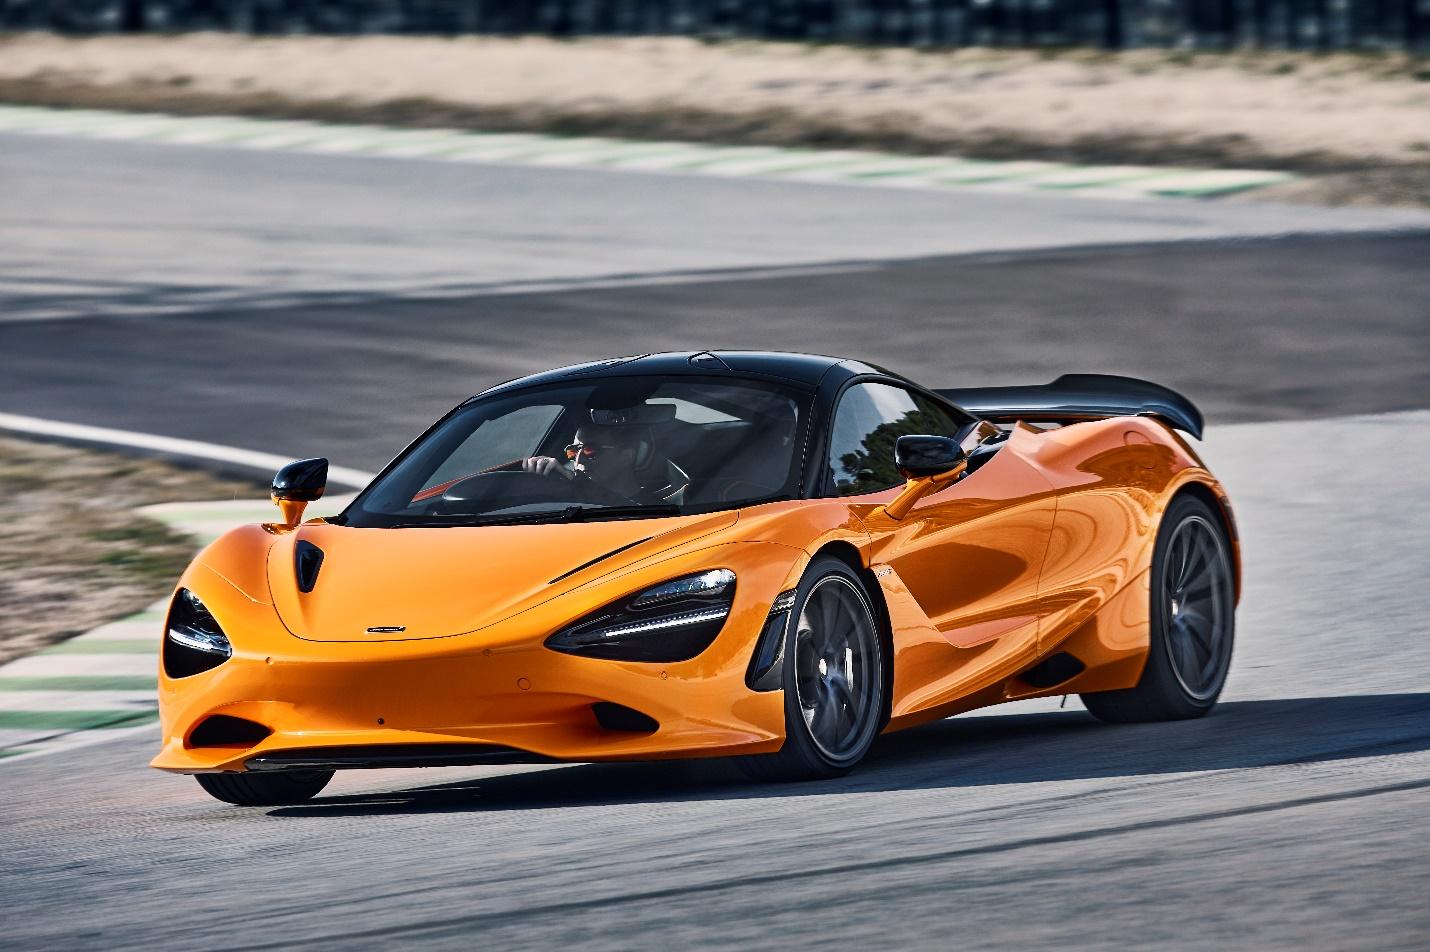 A orange sports car on a race track

Description automatically generated